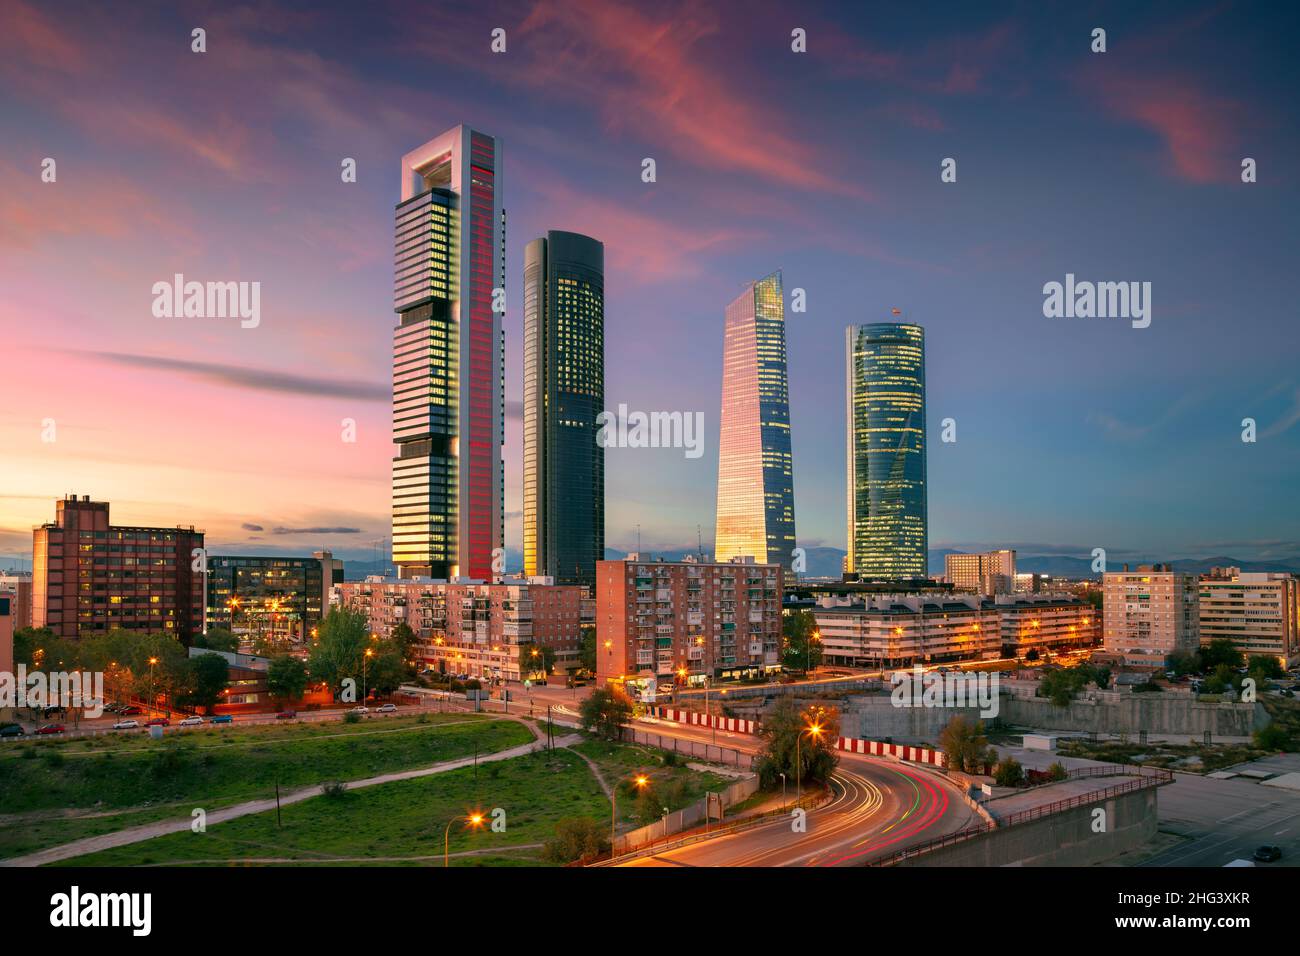 Madrid, Spain. Cityscape image of financial district of Madrid, Spain with modern skyscrapers at twilight blue hour. Stock Photo